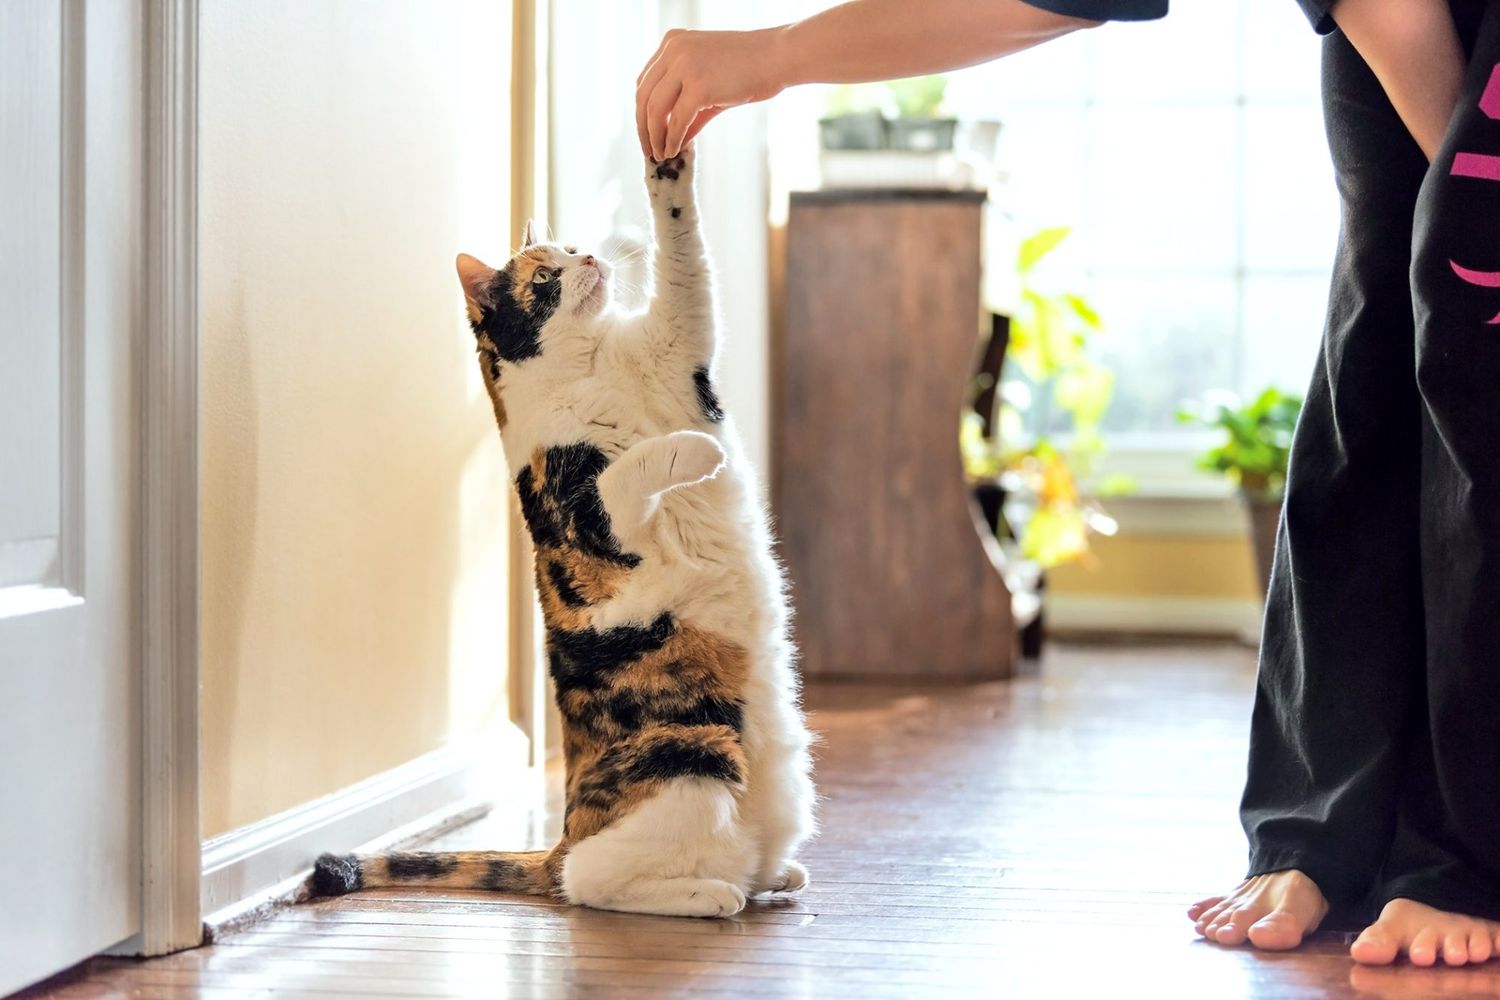 Calico cat playing game, sitting on hind legs learning cat tricks from a woman